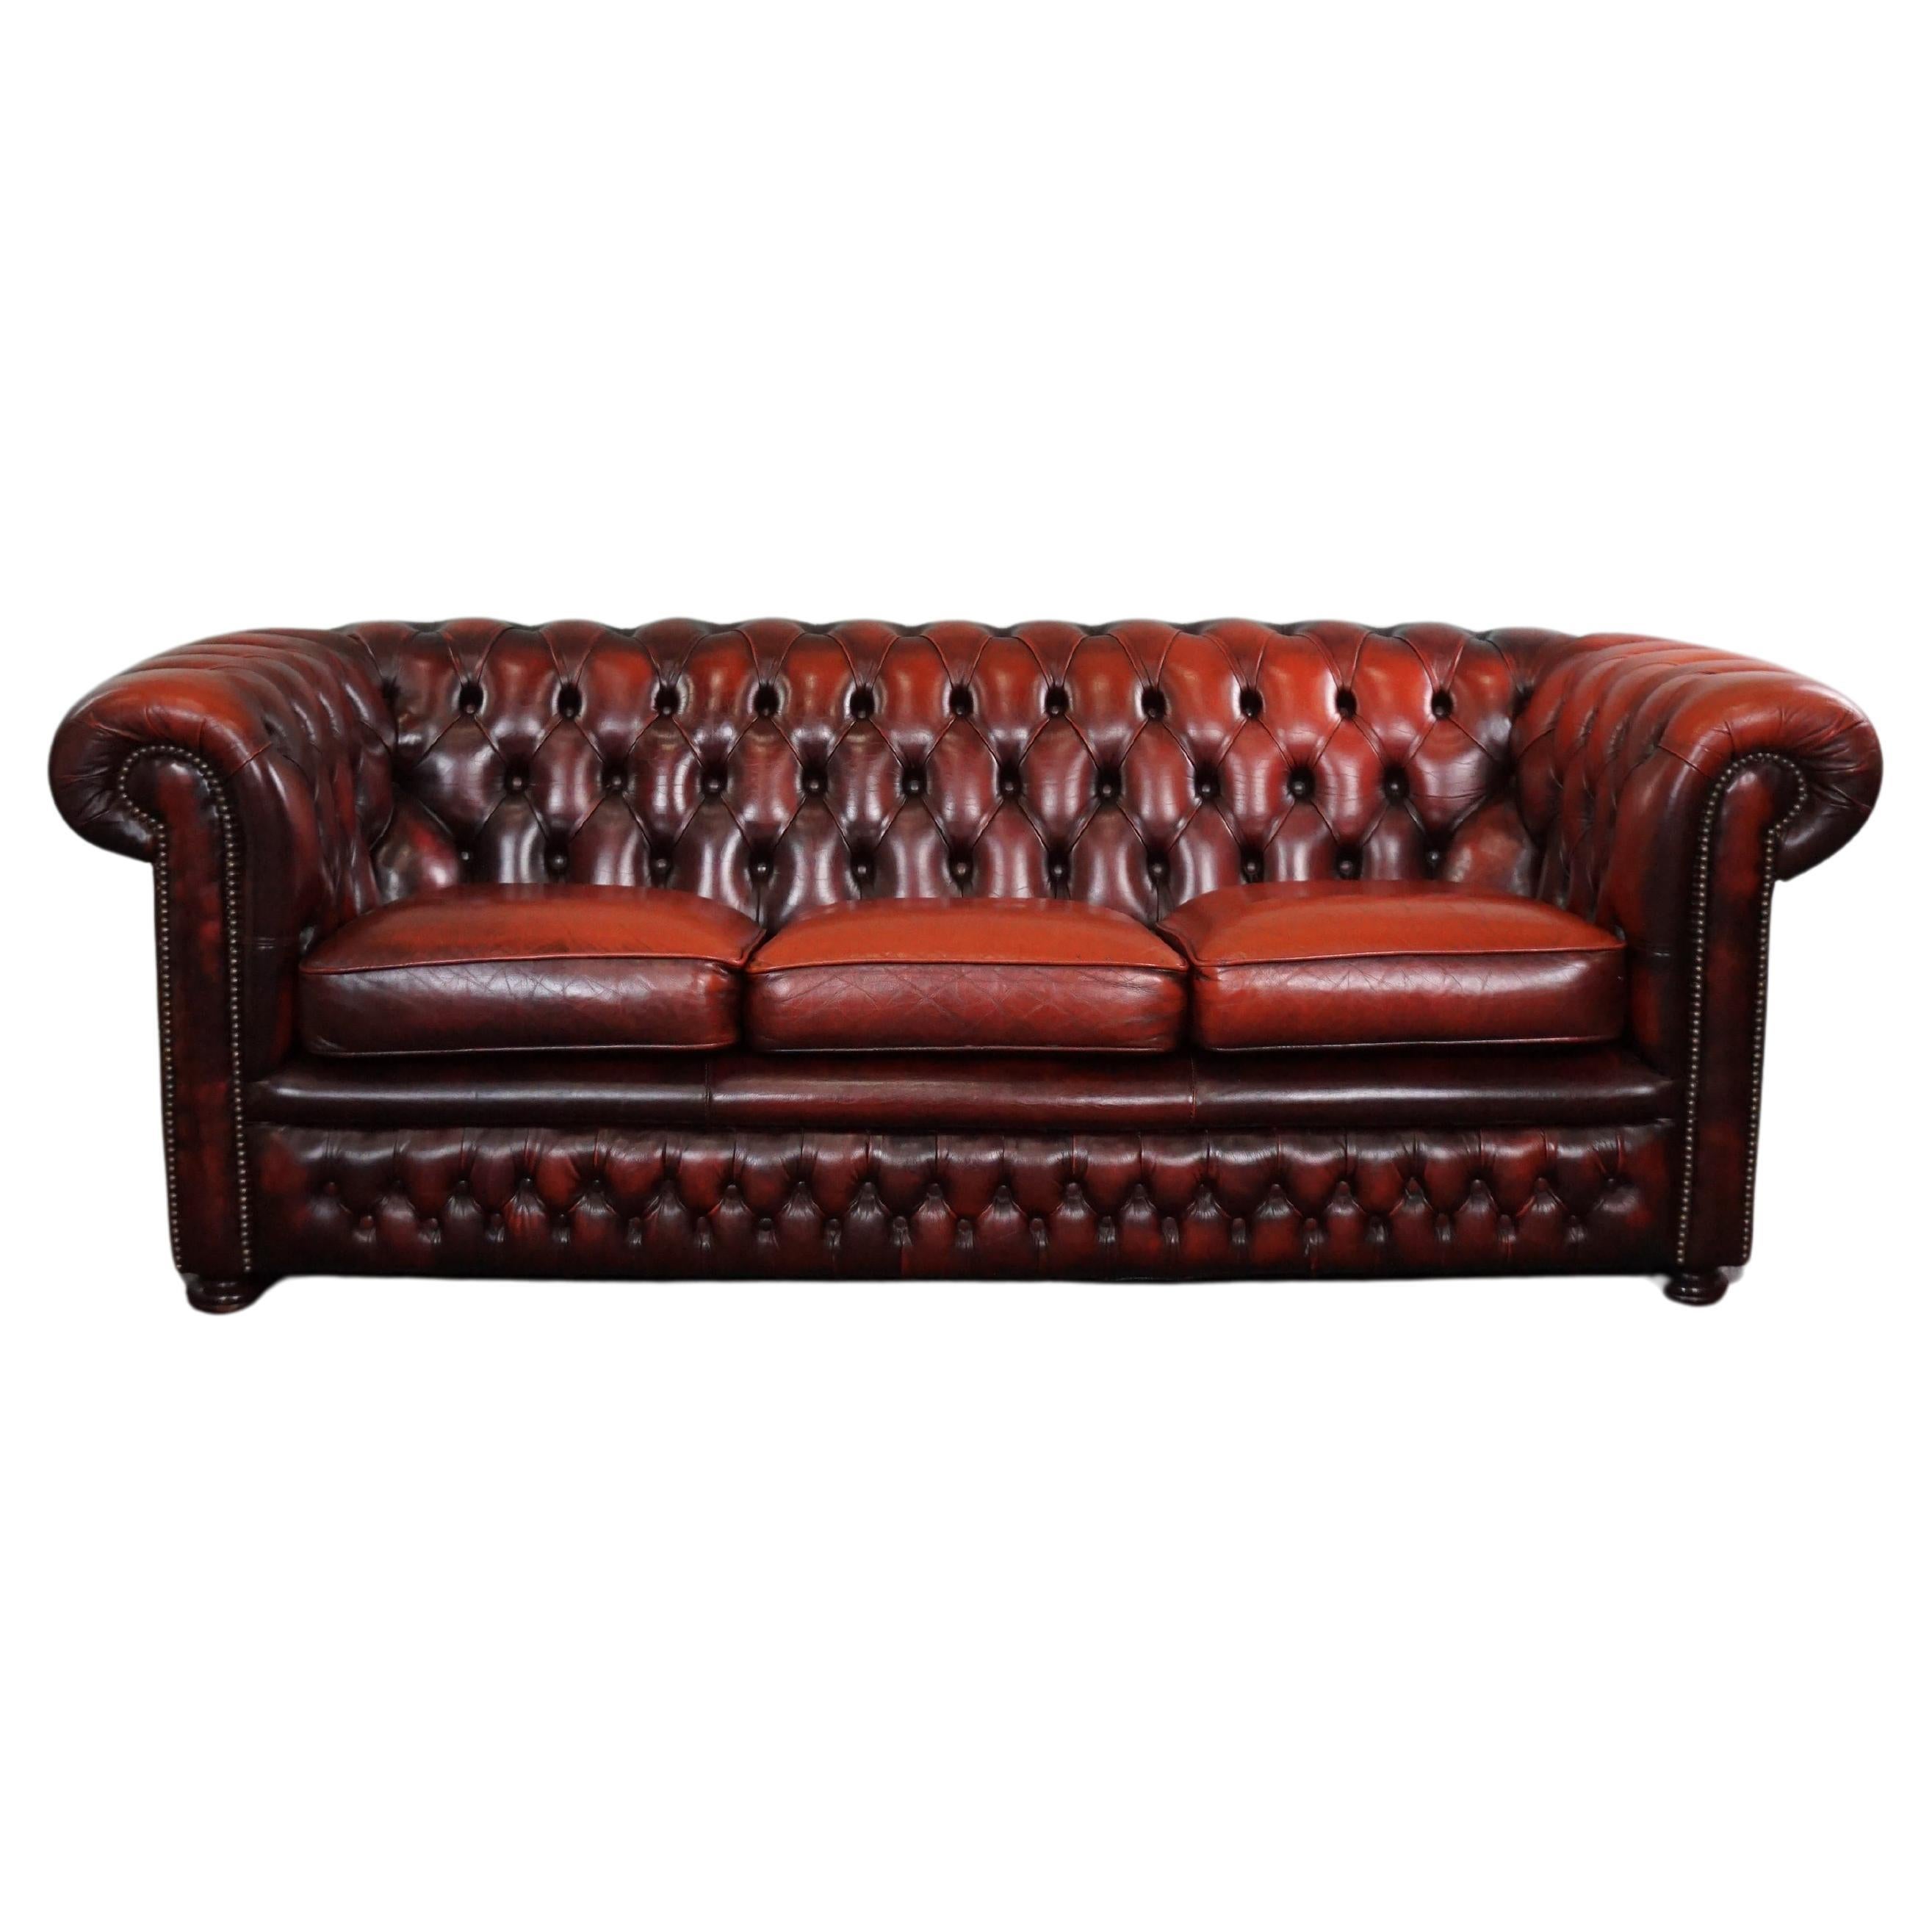 Beautiful colored red spacious cow leather Chesterfield sofa, 2.5 seater For Sale